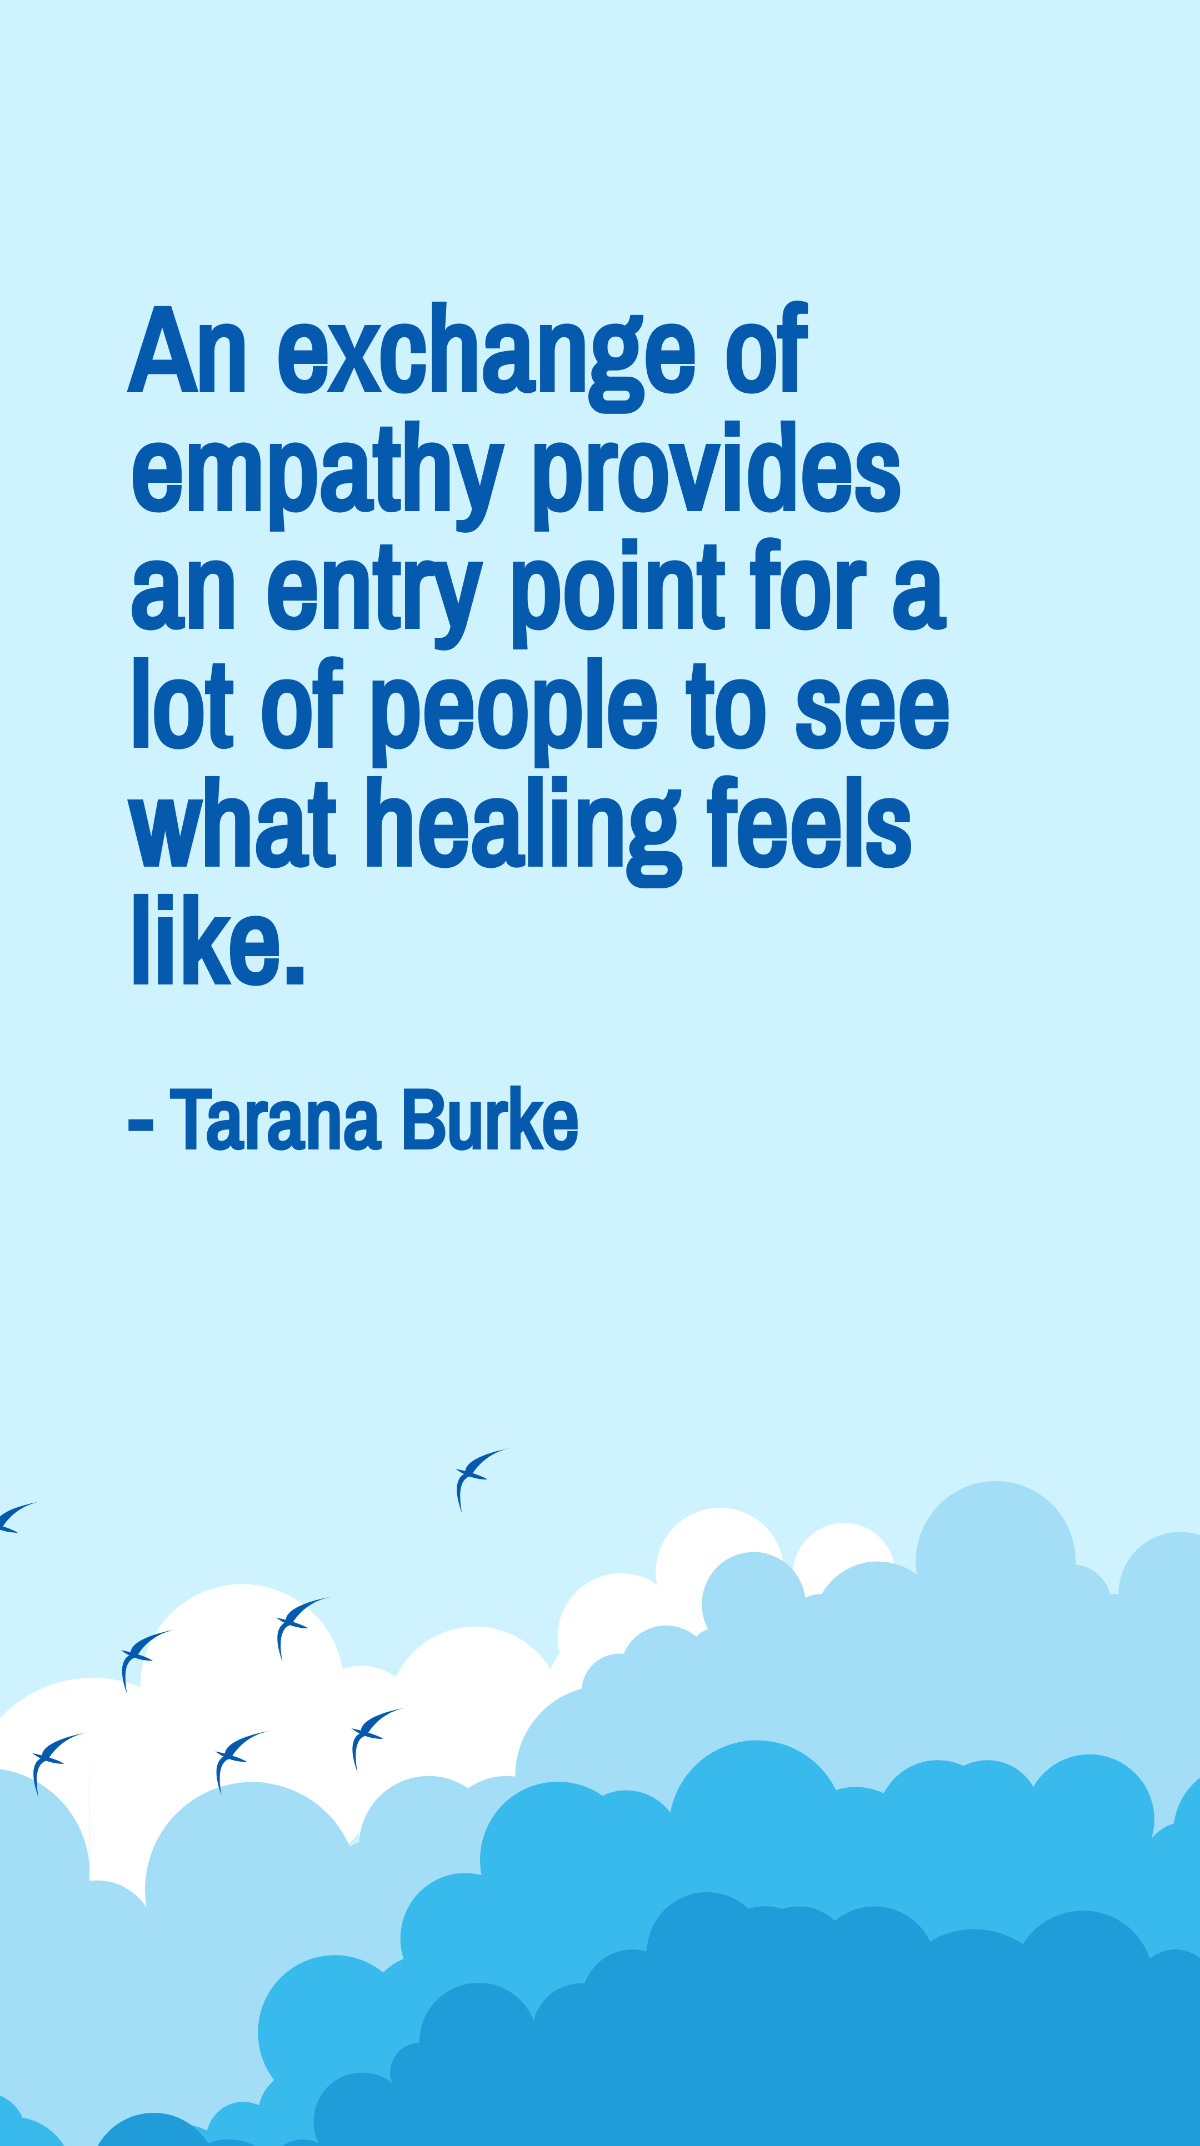 Free Tarana Burke - An exchange of empathy provides an entry point for a lot of people to see what healing feels like. Template